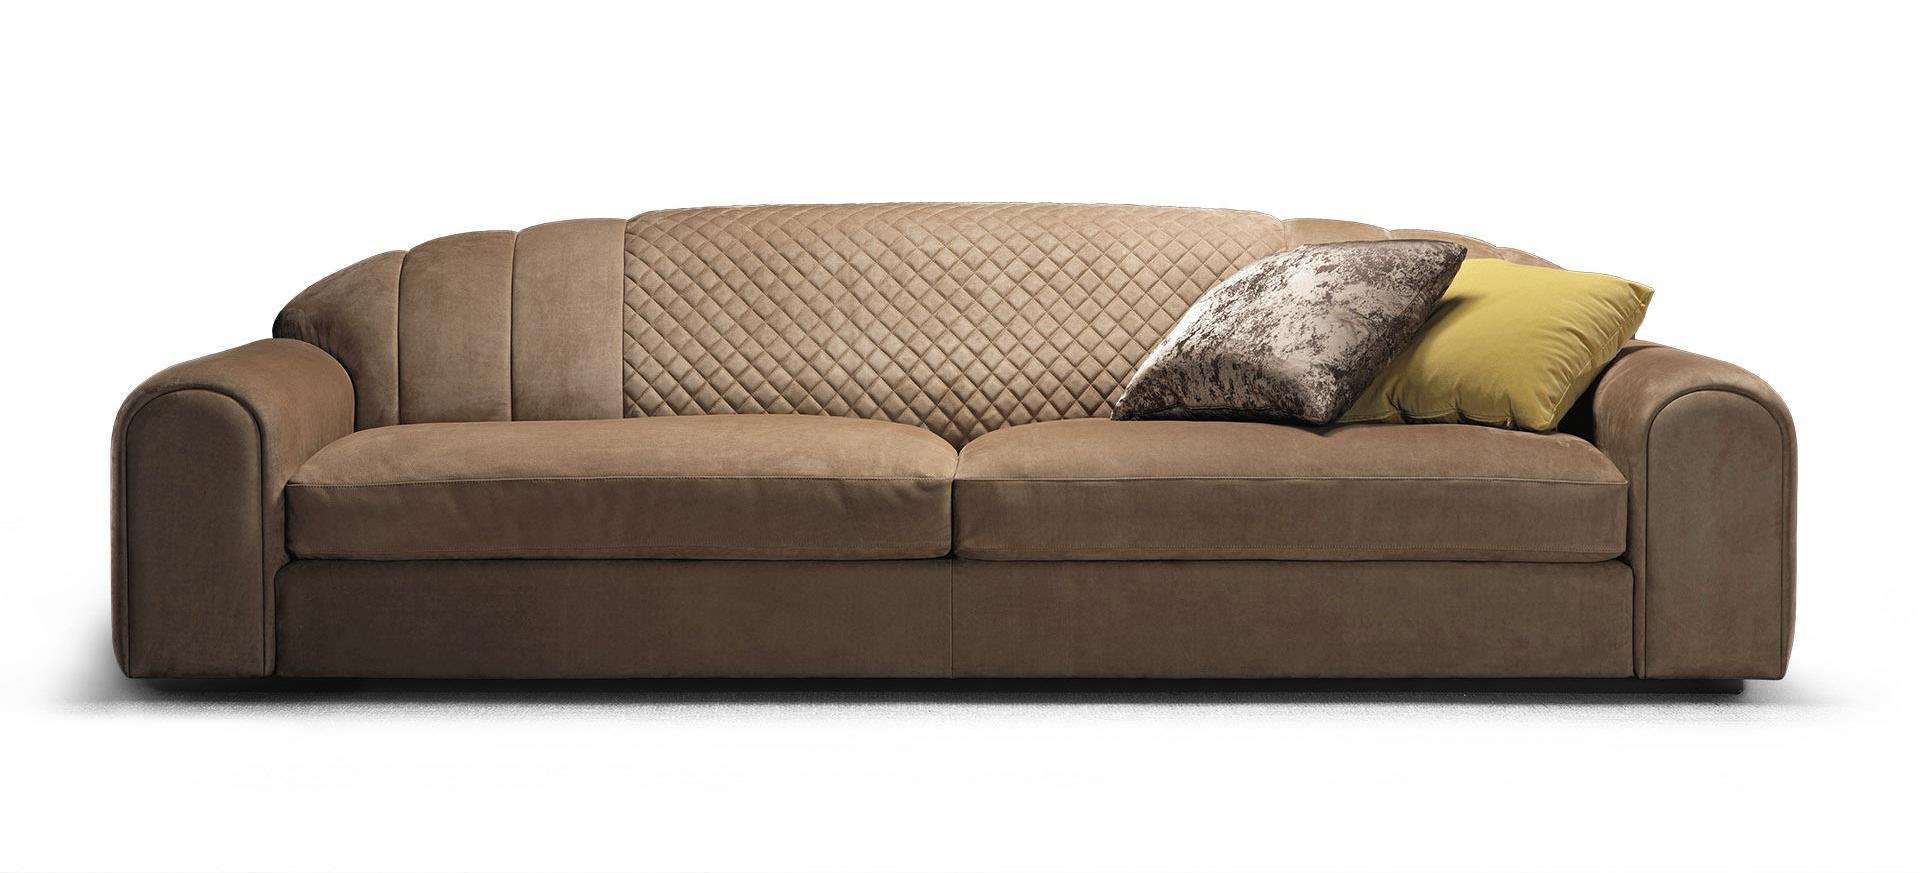  Luxe Plush-designed Sofa with Large Seat